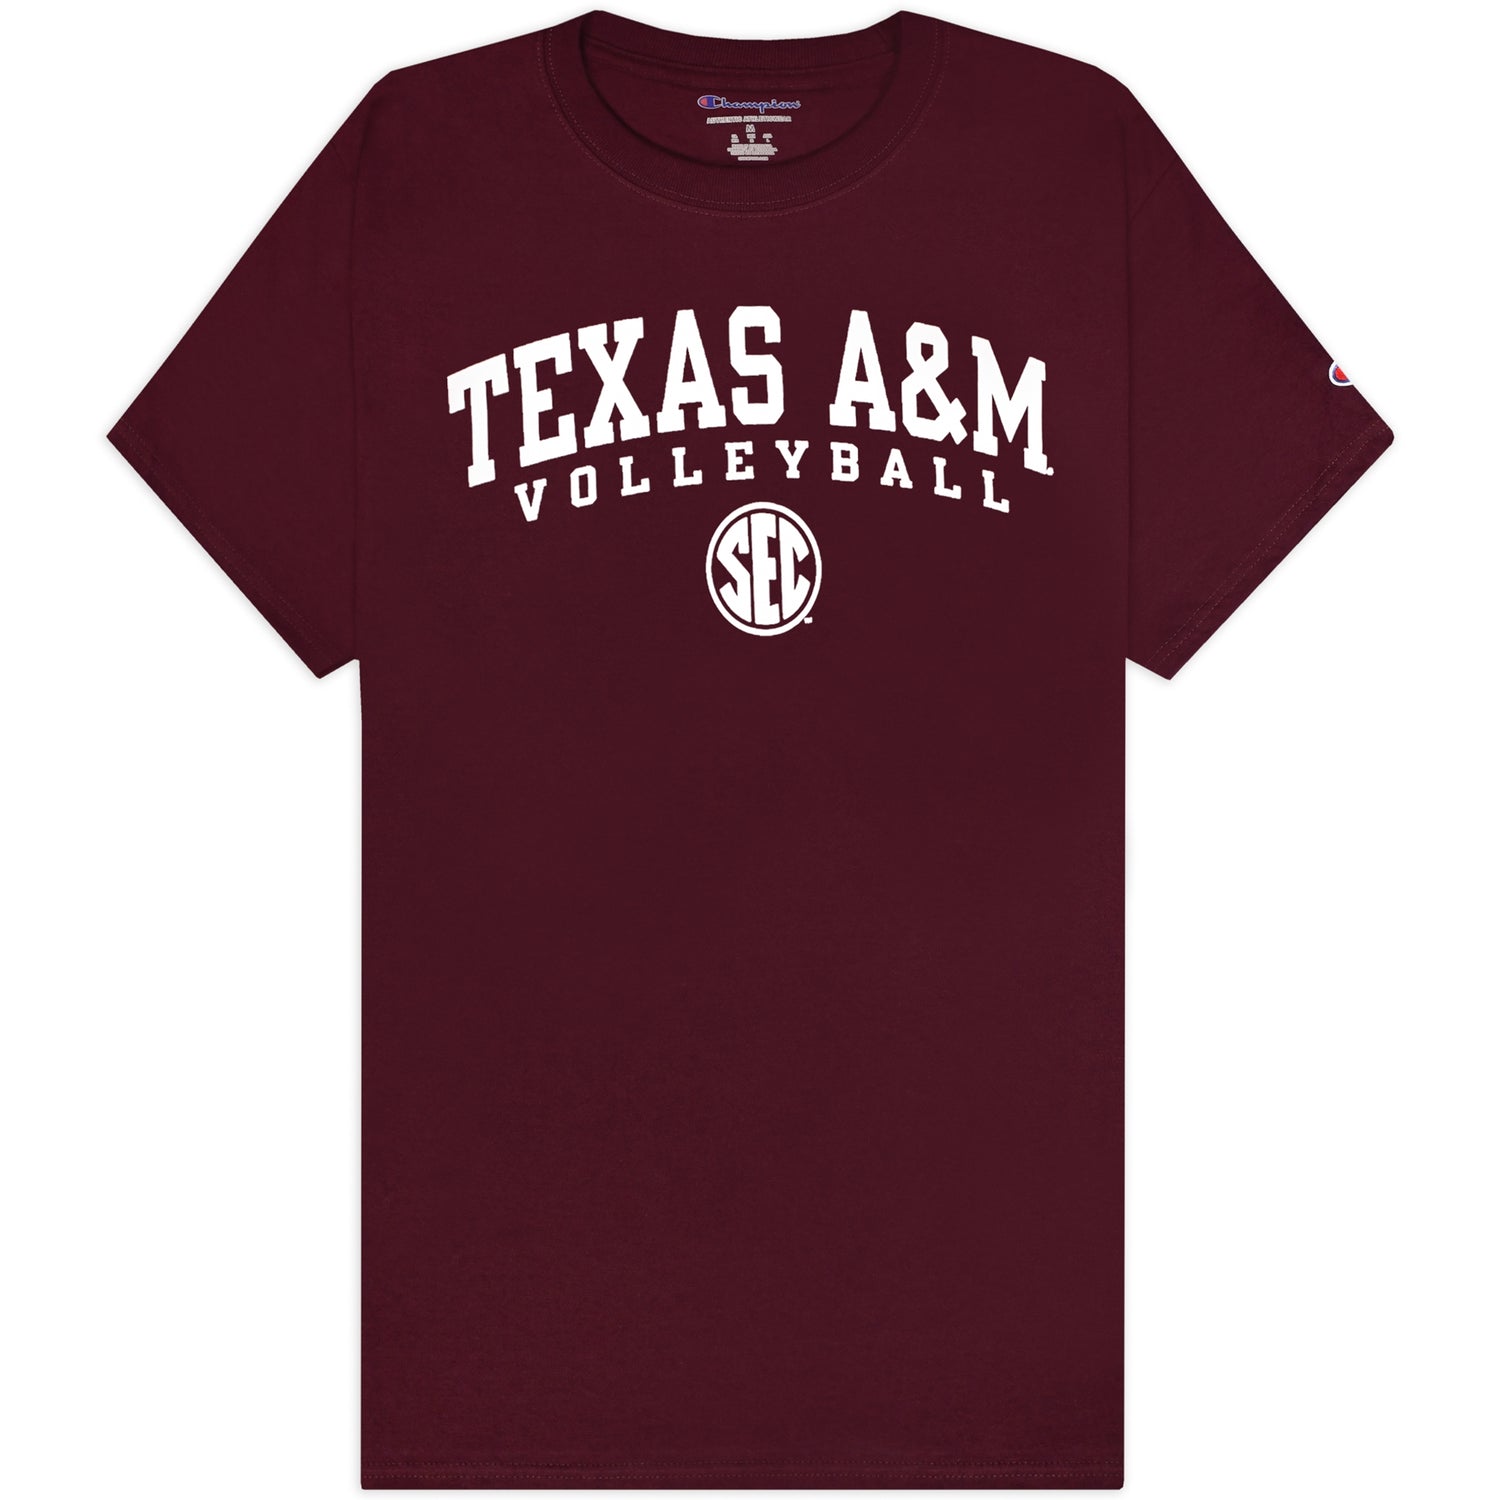 Texas A&M Champion Volleyball SEC T-Shirt S / Volleyball